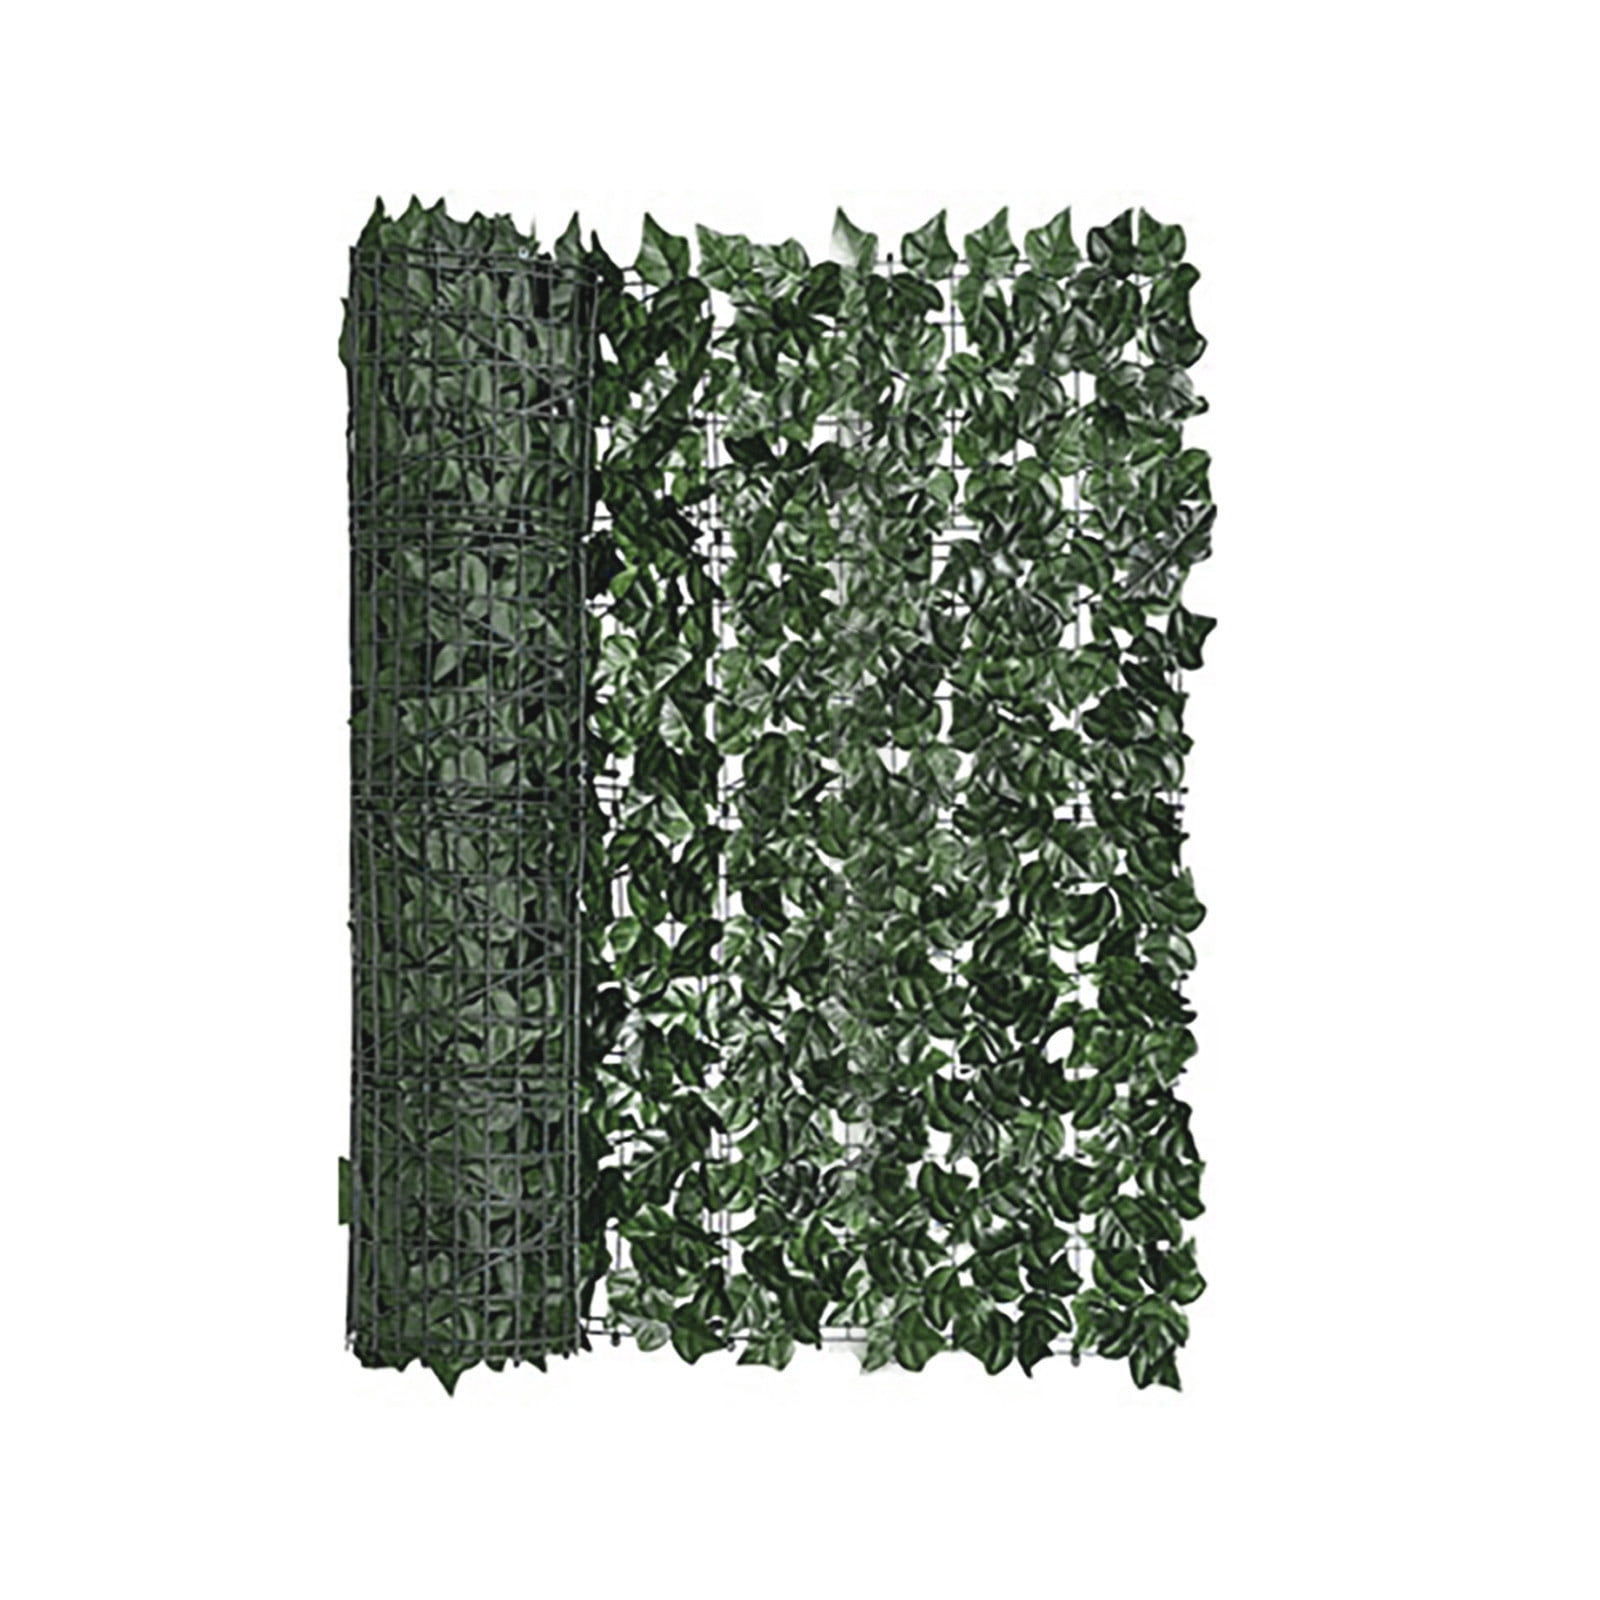 Moocorvic Artificial Faux Ivy Hedge Grass Wall Privacy Screen ...